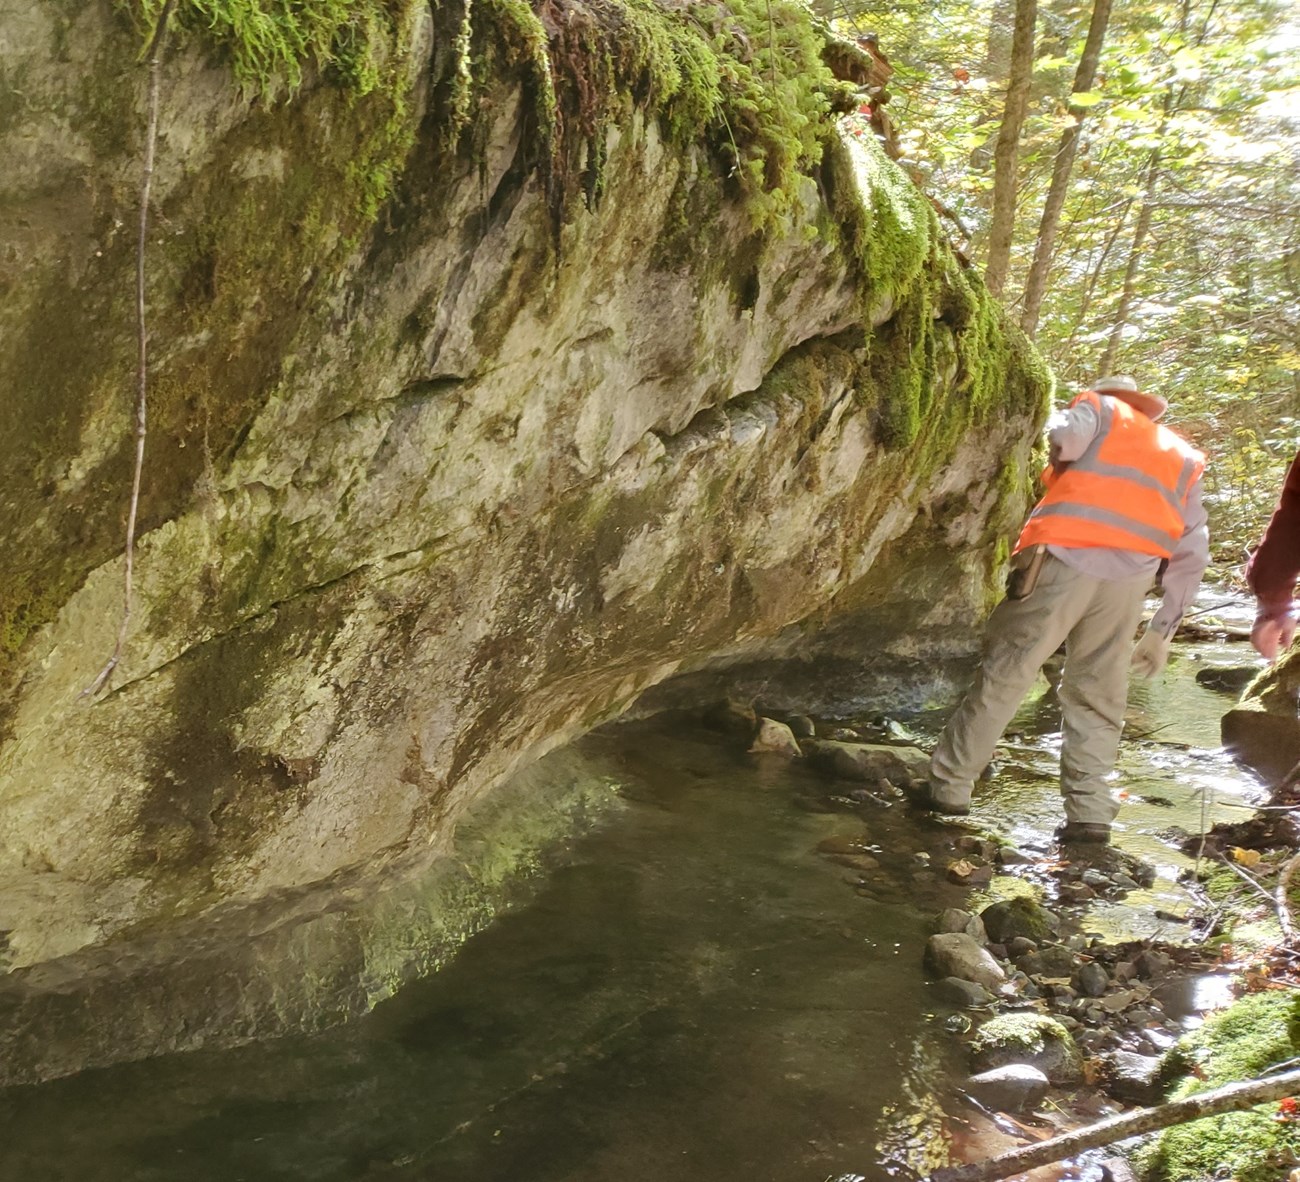 Photo of a person examining rocks in a stream bed next to a large moss covered boulder.